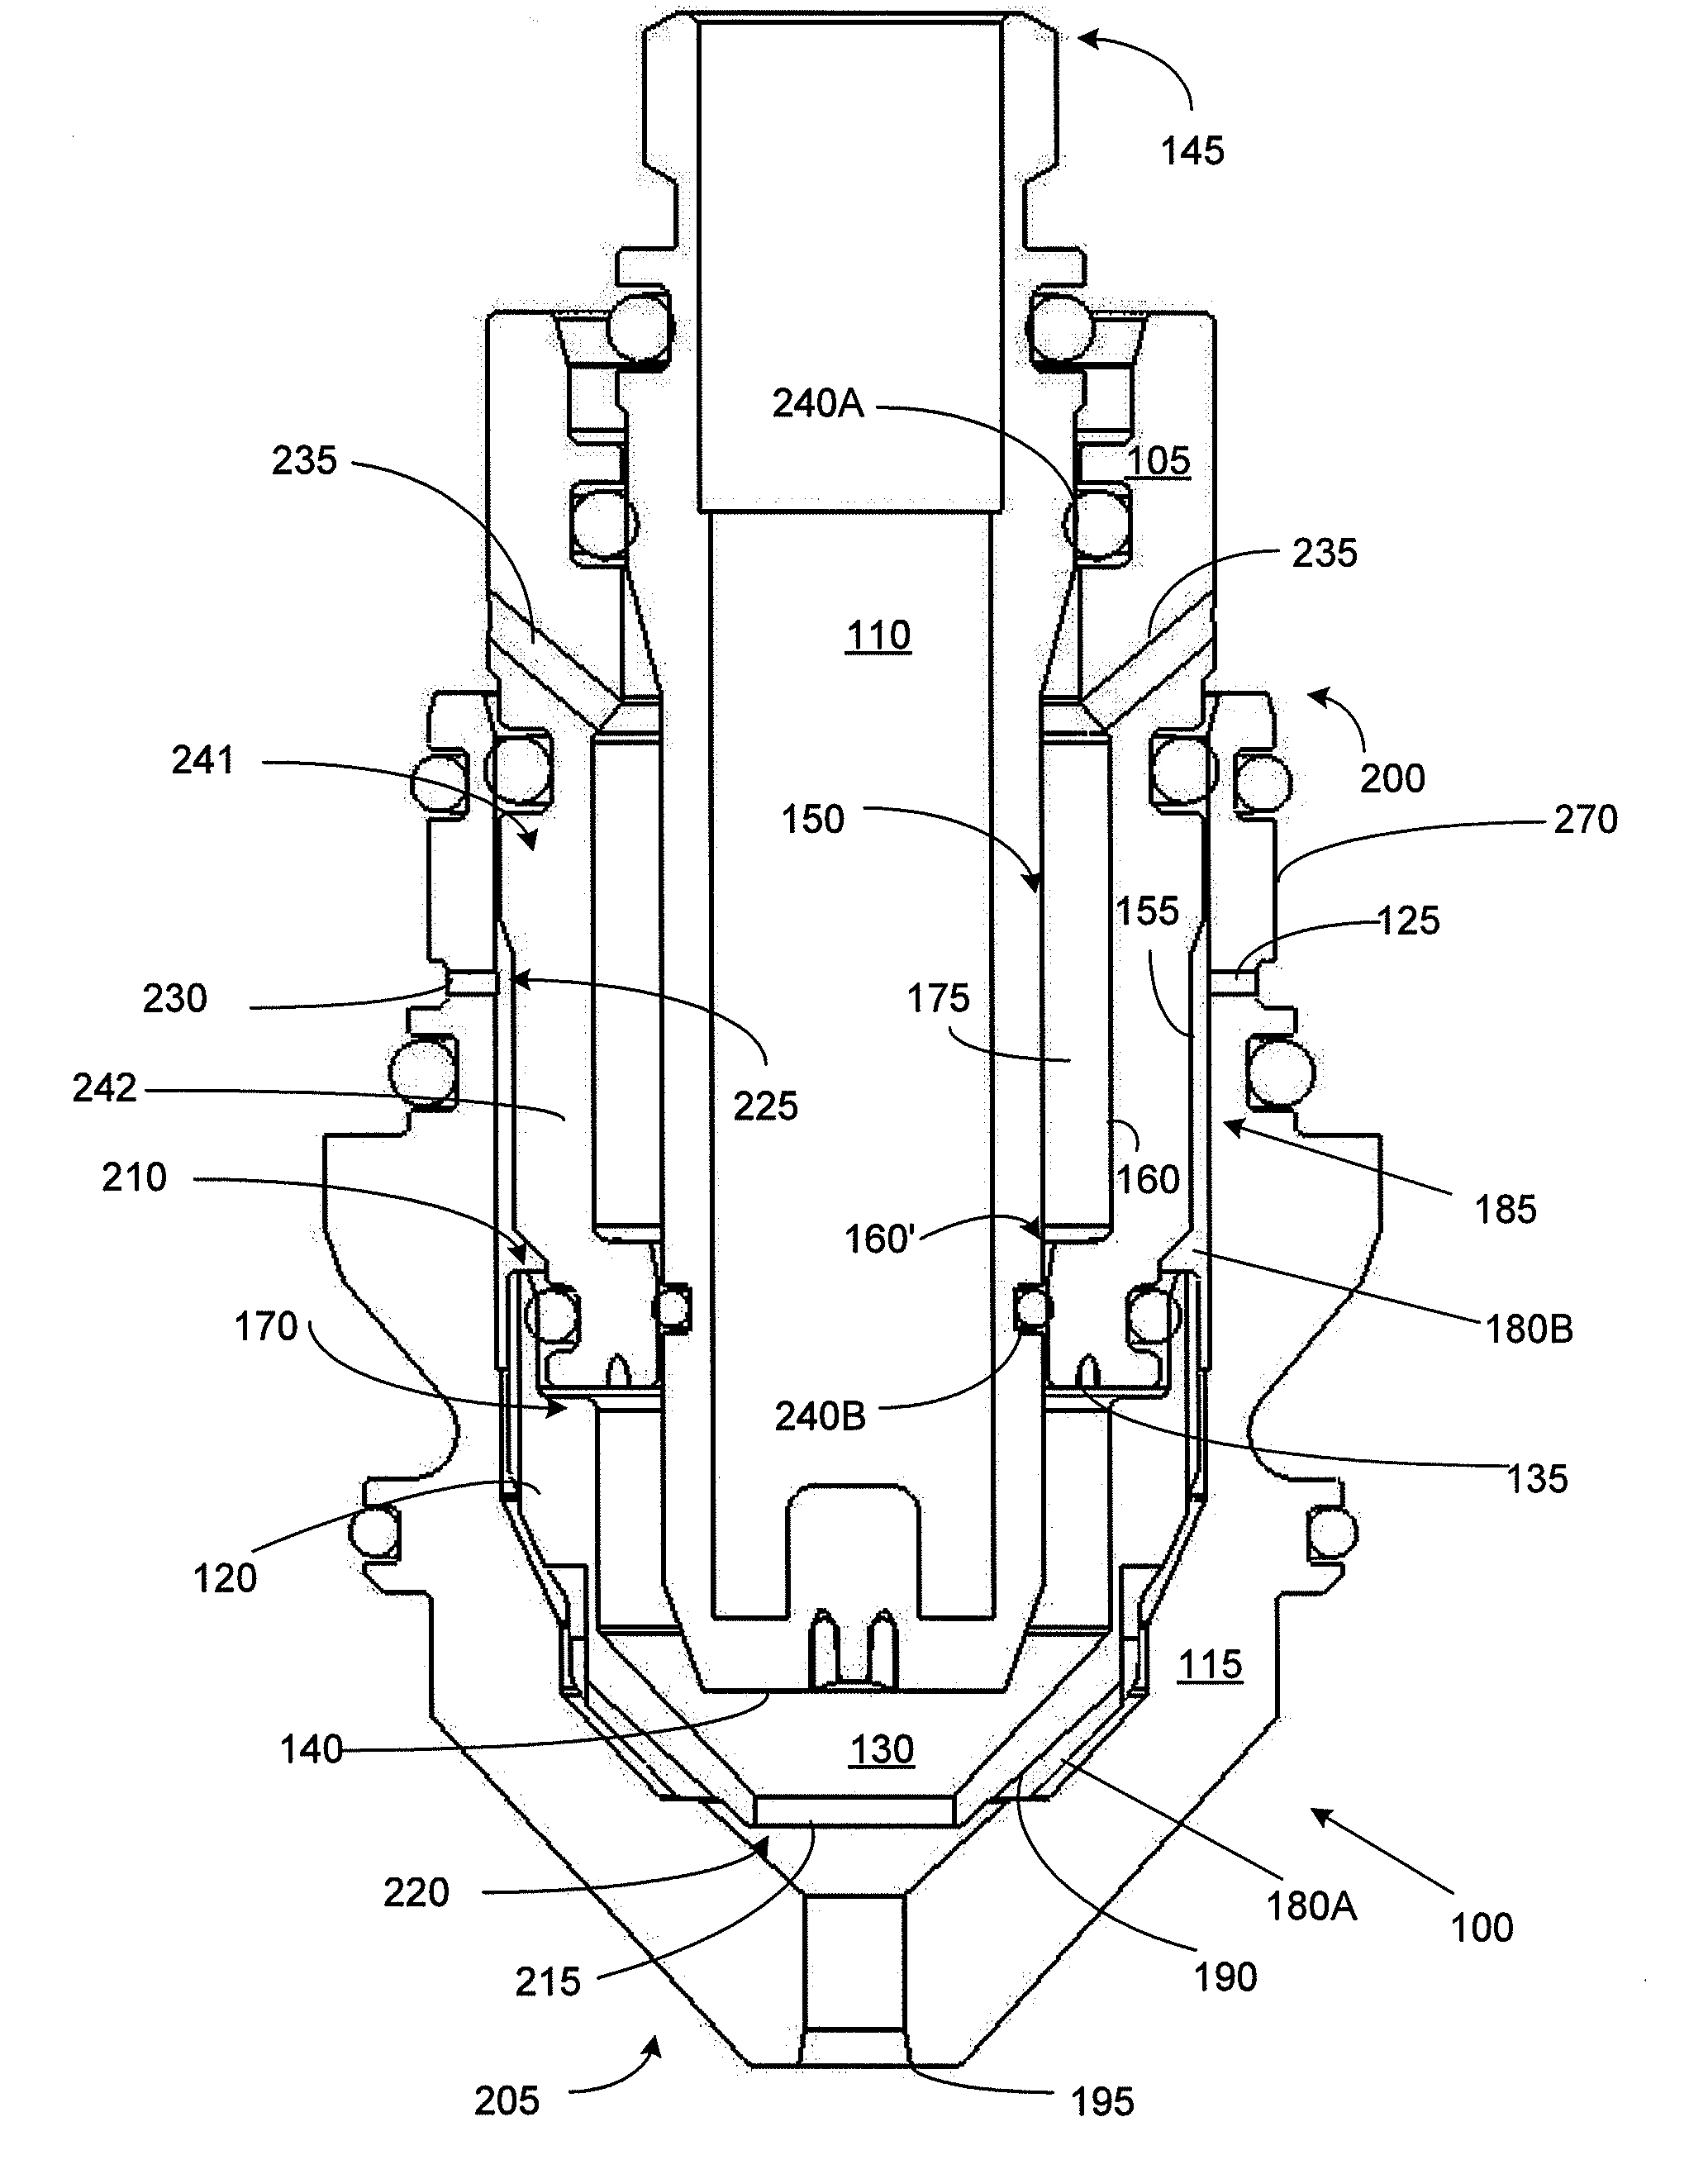 Nozzle with exposed vent passage